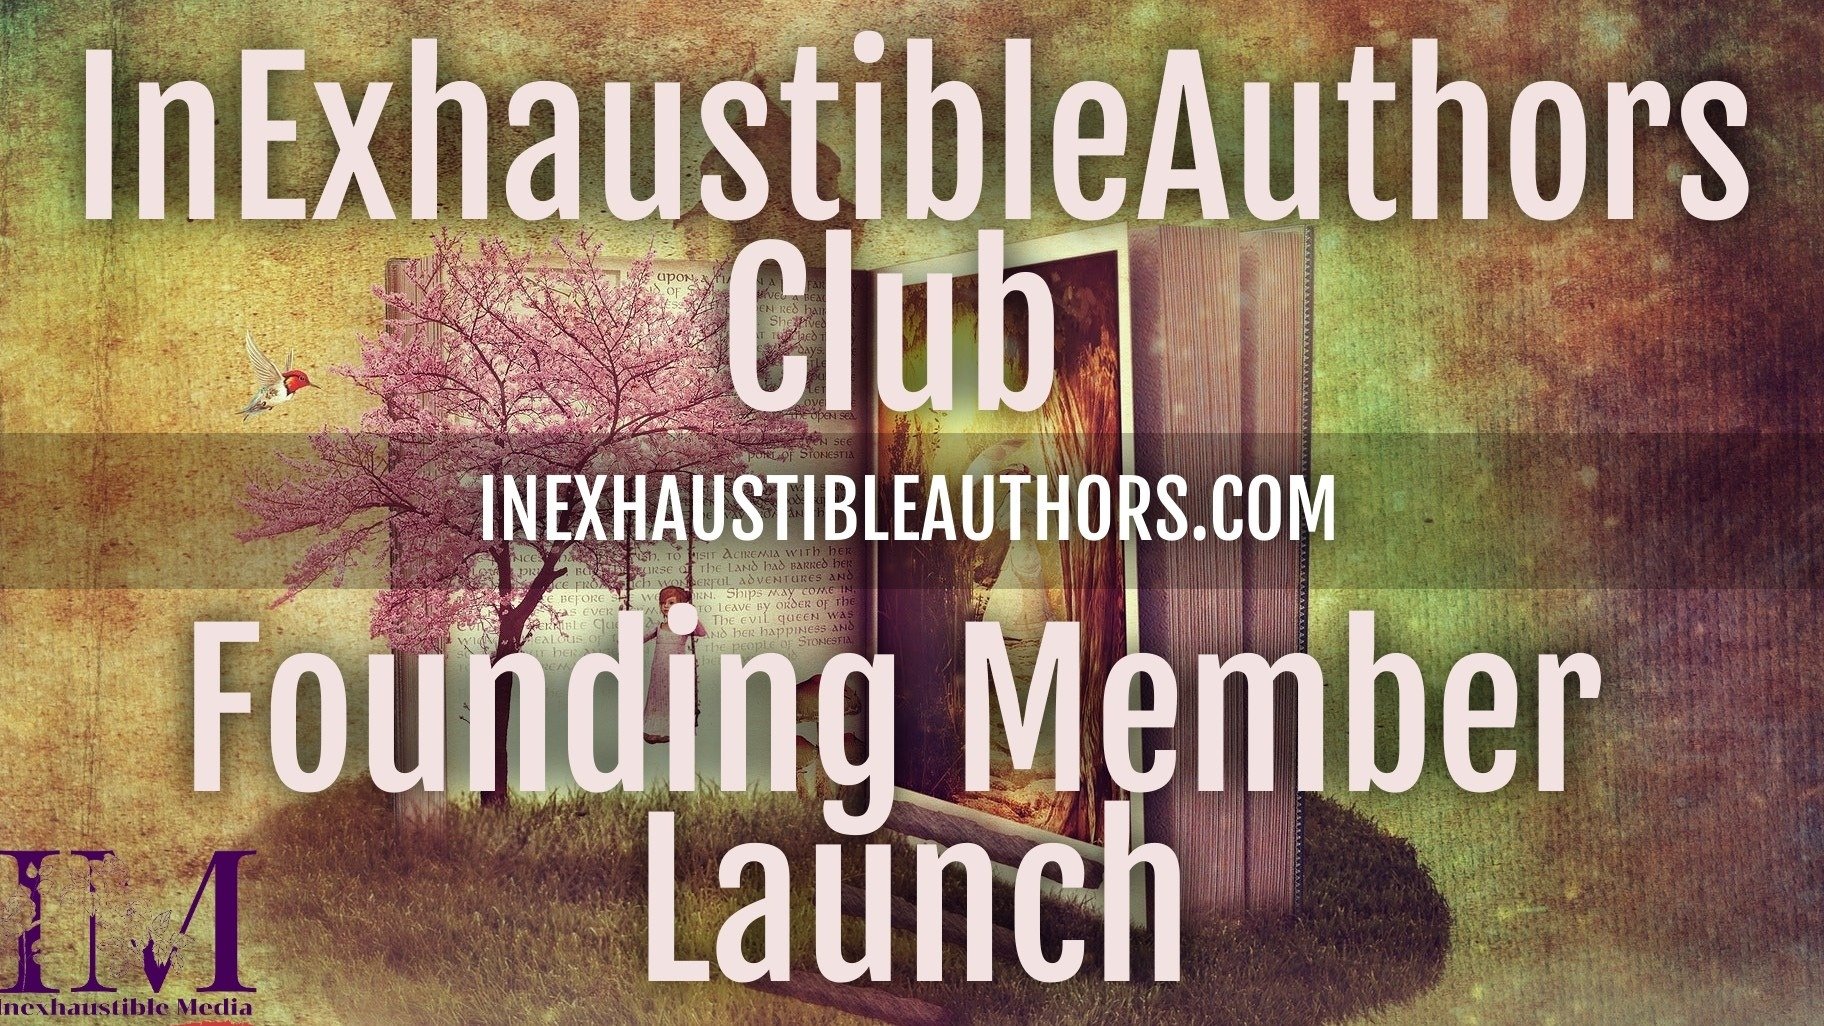 Authors can now Save Time and Write More with InExhaustible Author's Club